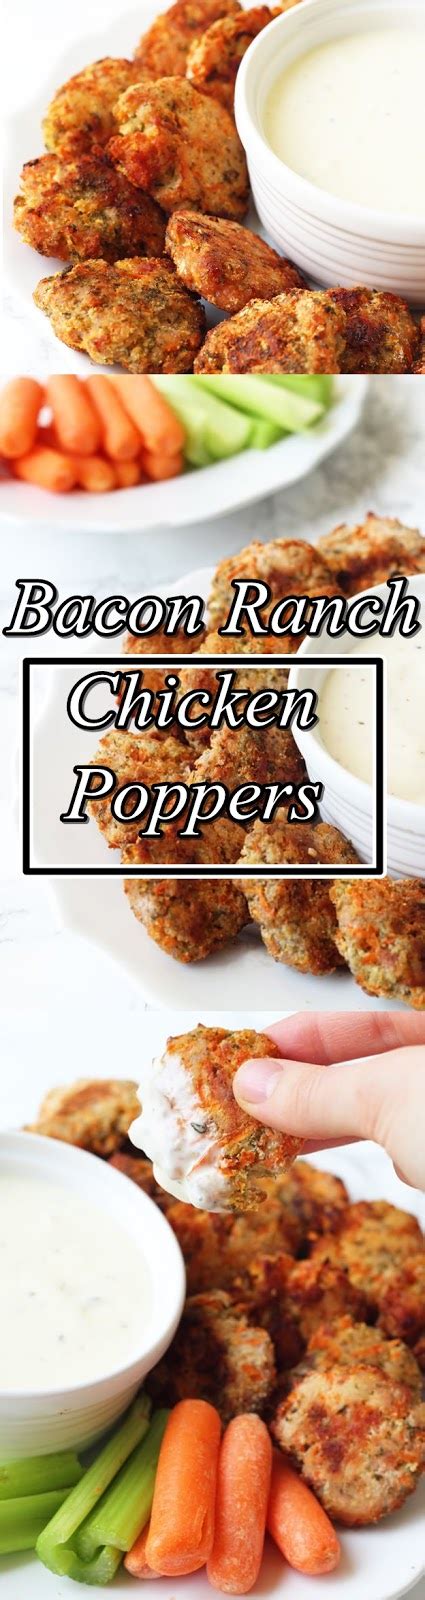 Chicken poppers are basically chicken nuggets with the addition of veggies and minus the breading. Bacon Ranch Chicken Poppers (Paleo, Whole 30, AIP ...